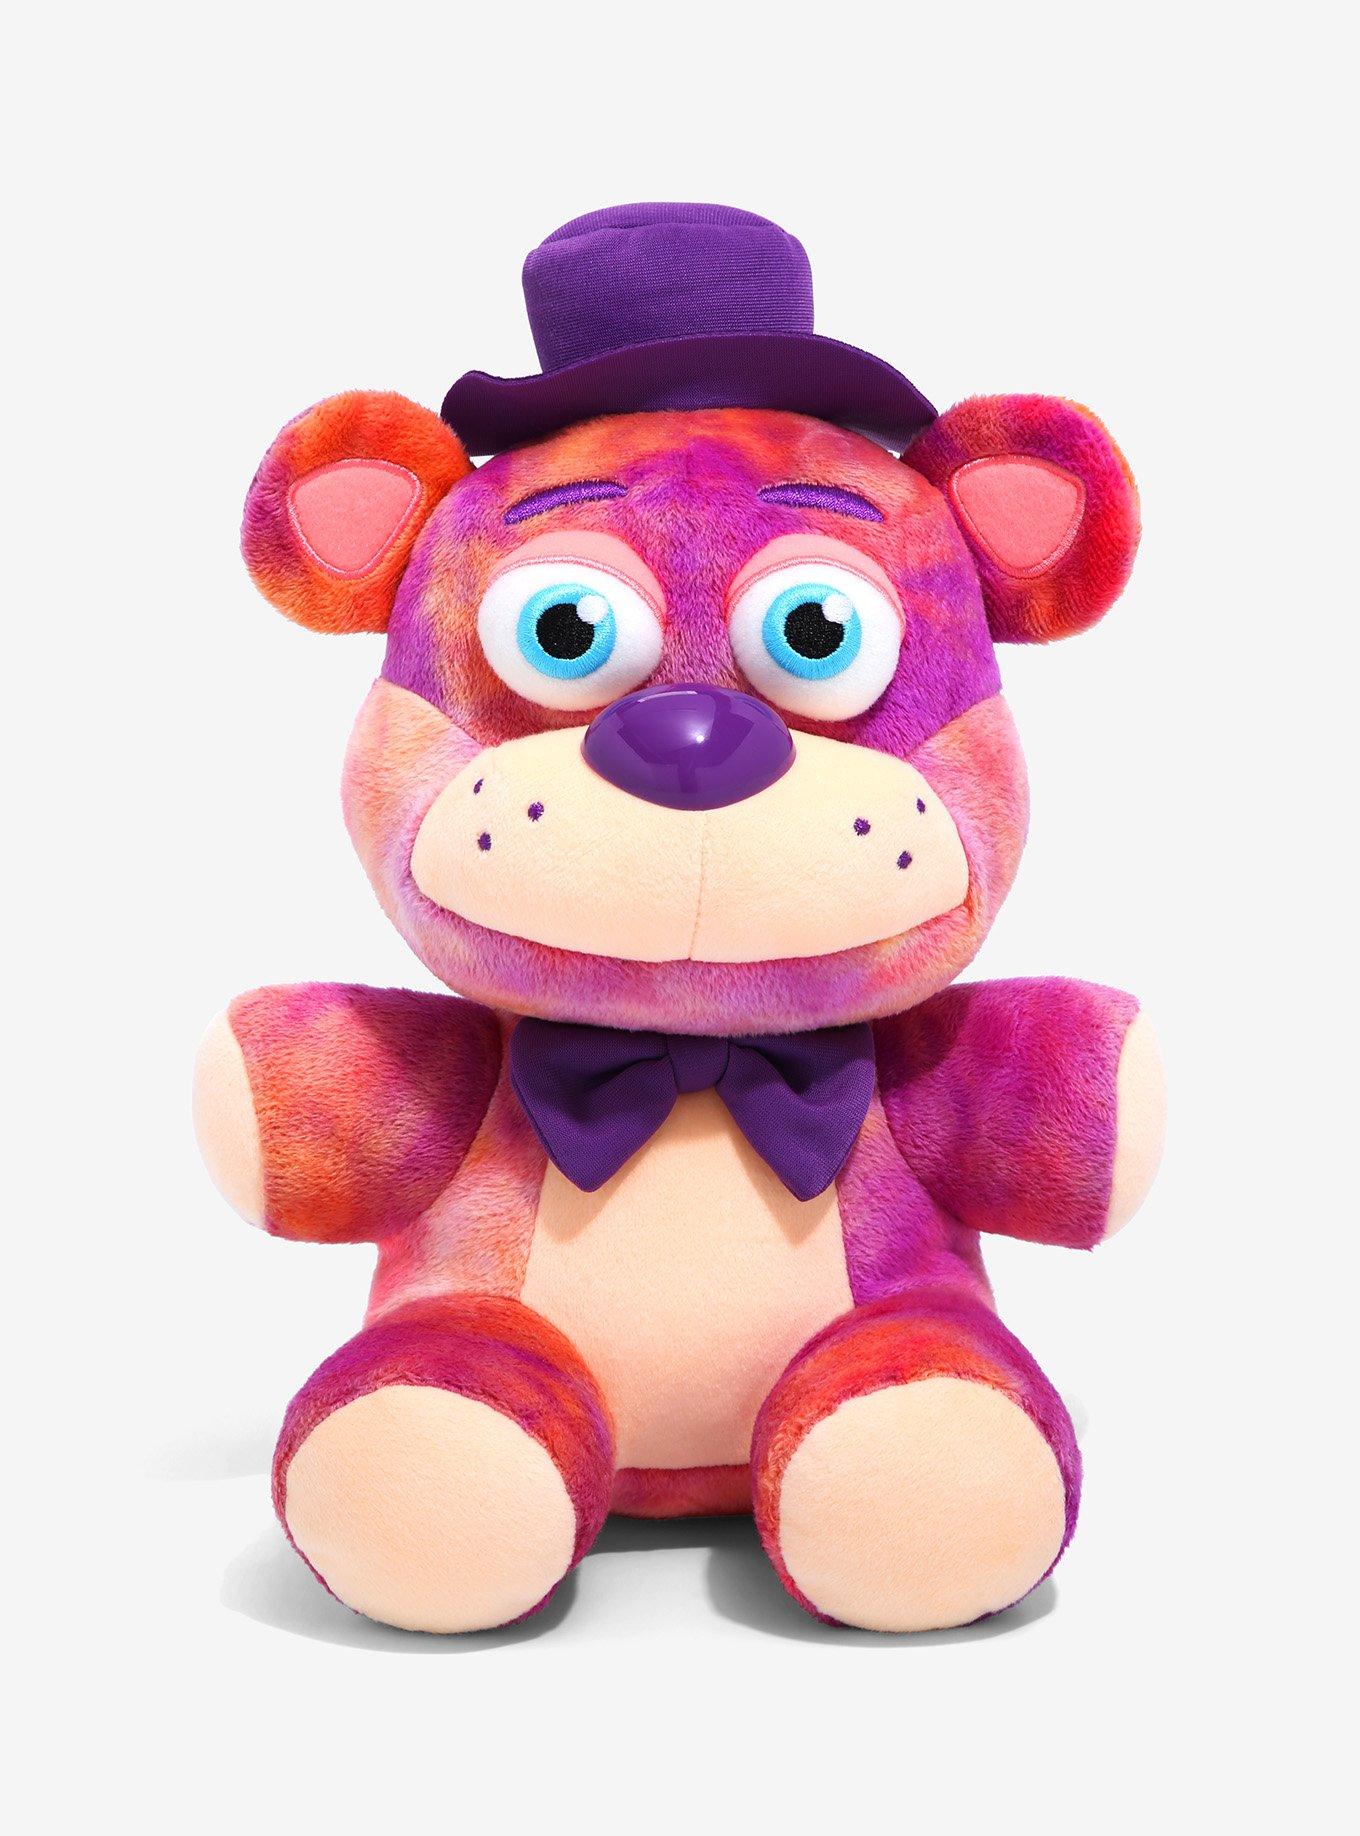  Funko Plush: Five Nights at Freddy's (FNAF) Tiedye - Springtrap  - Soft Toy - Birthday Gift Idea - Official Merchandise - Stuffed Plushie  for Kids and Adults - Ideal for Video